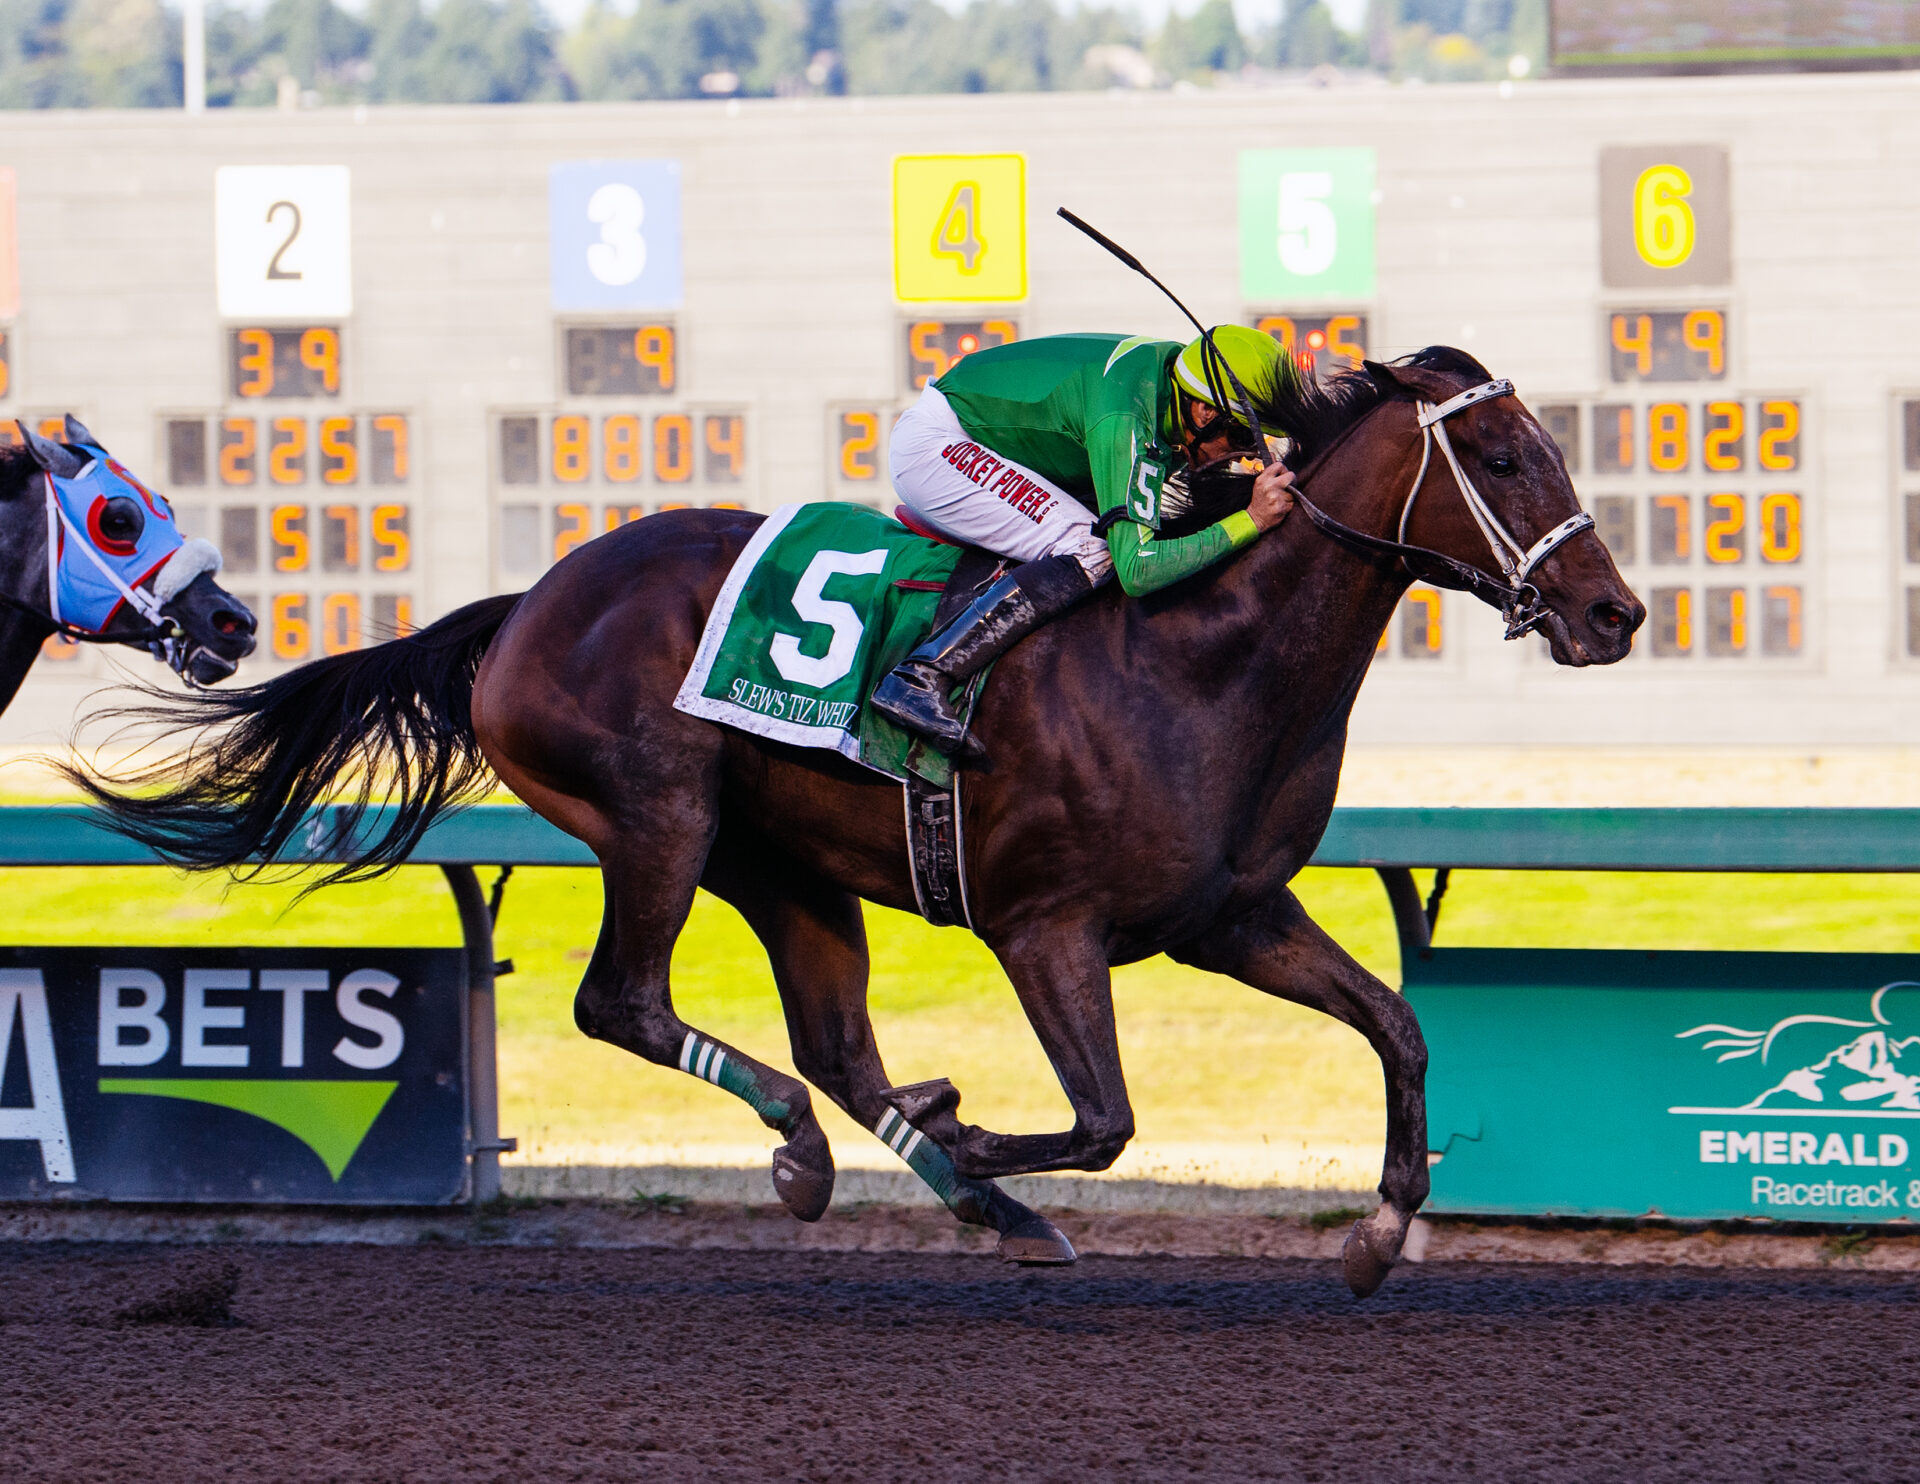 Emerald Downs Larrys Week in Review, Cruz hits career win #800, Zunino-Wenzel sweep Stakes, 15k Pick 6 Payout and more